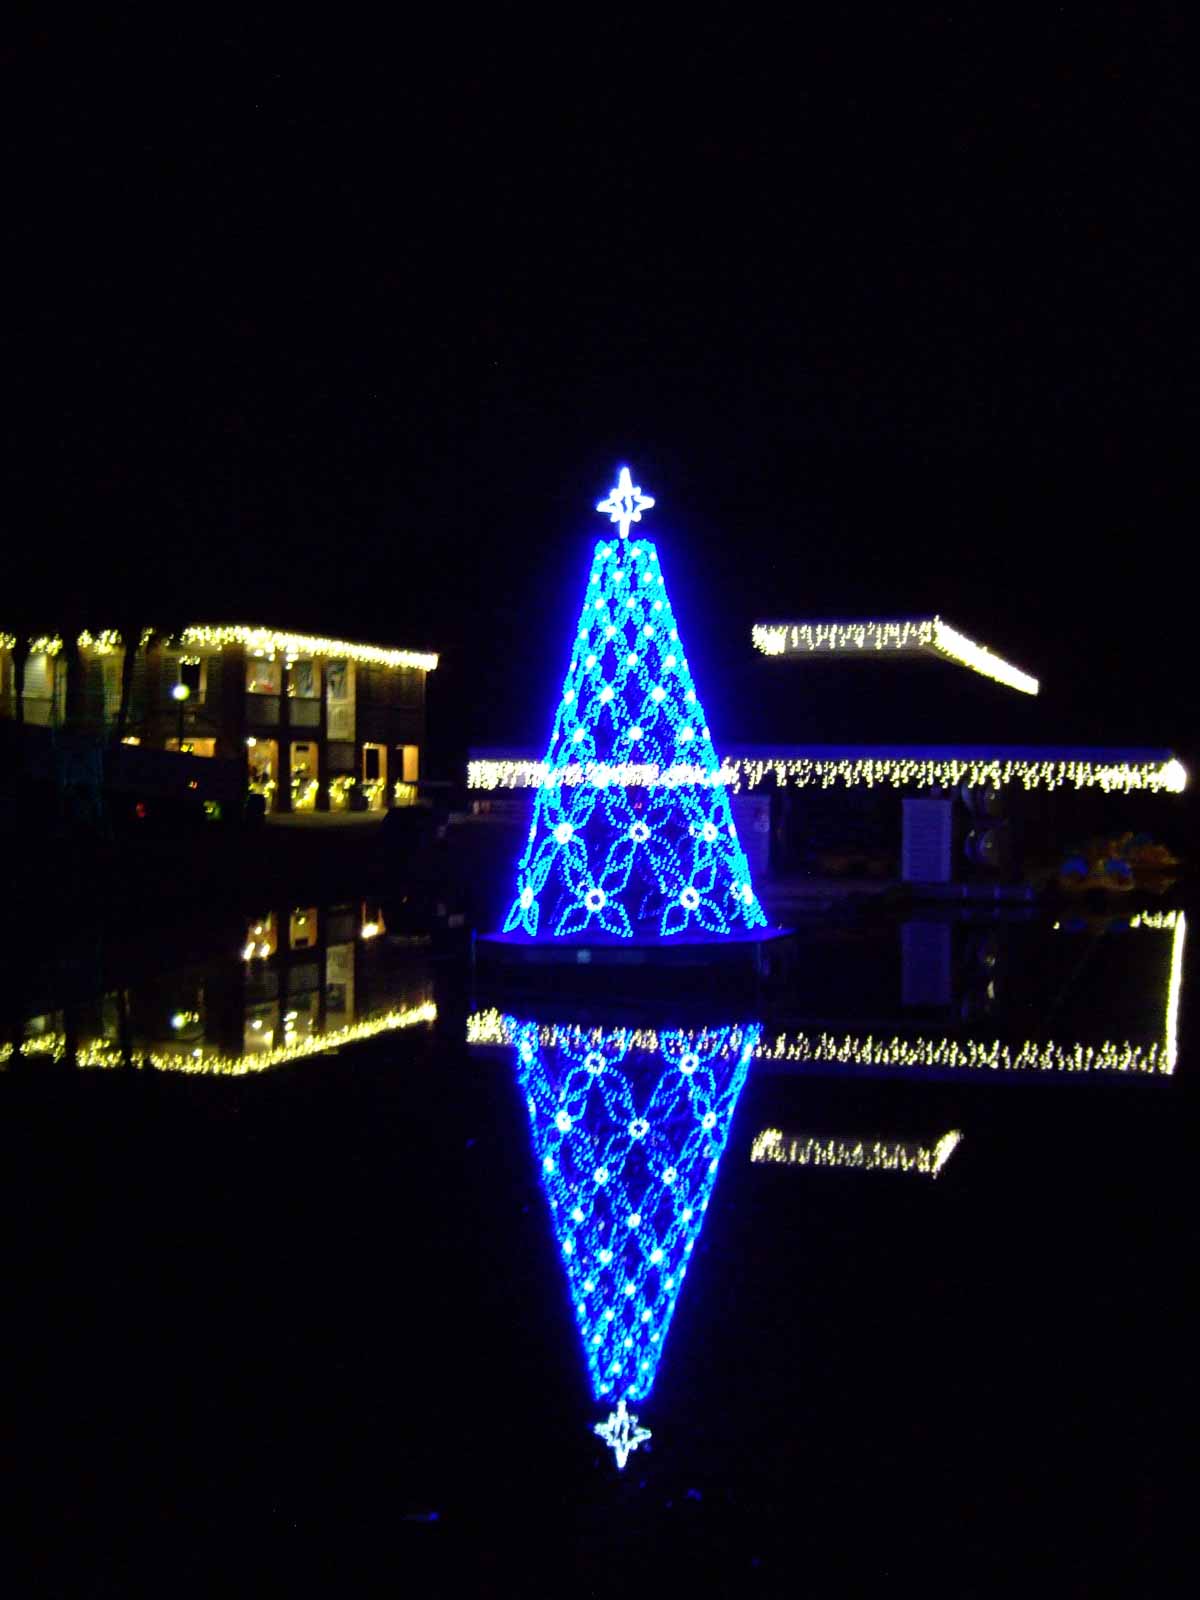 Blue Christmas tree lights reflected on water